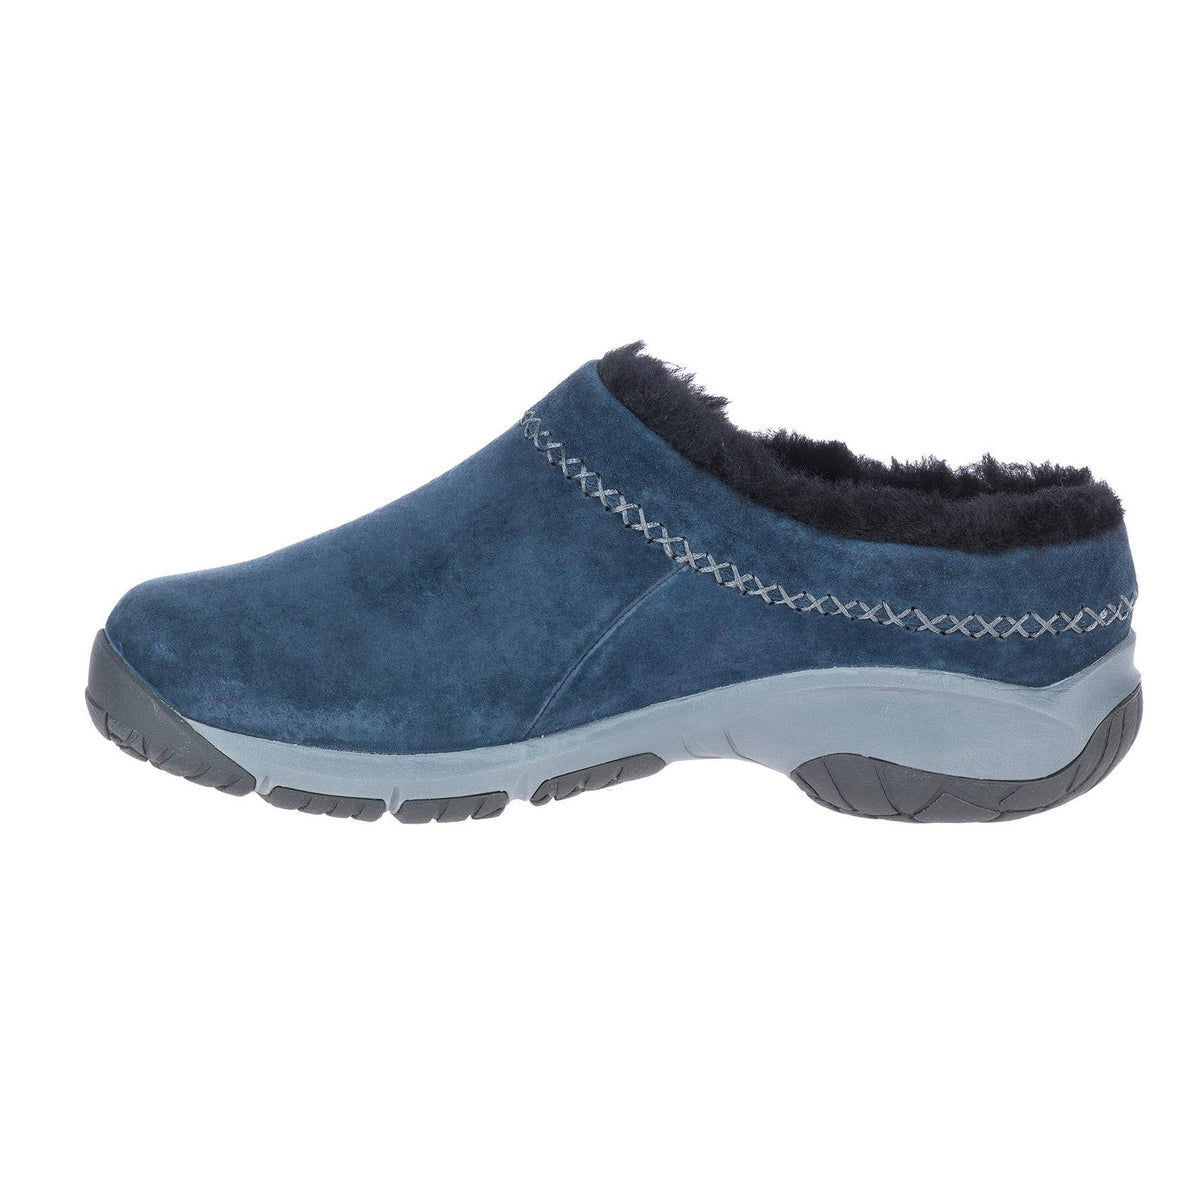 MERRELL ENCORE ICE 4 NAVY slip-on shoe with fur lining and decorative stitching.